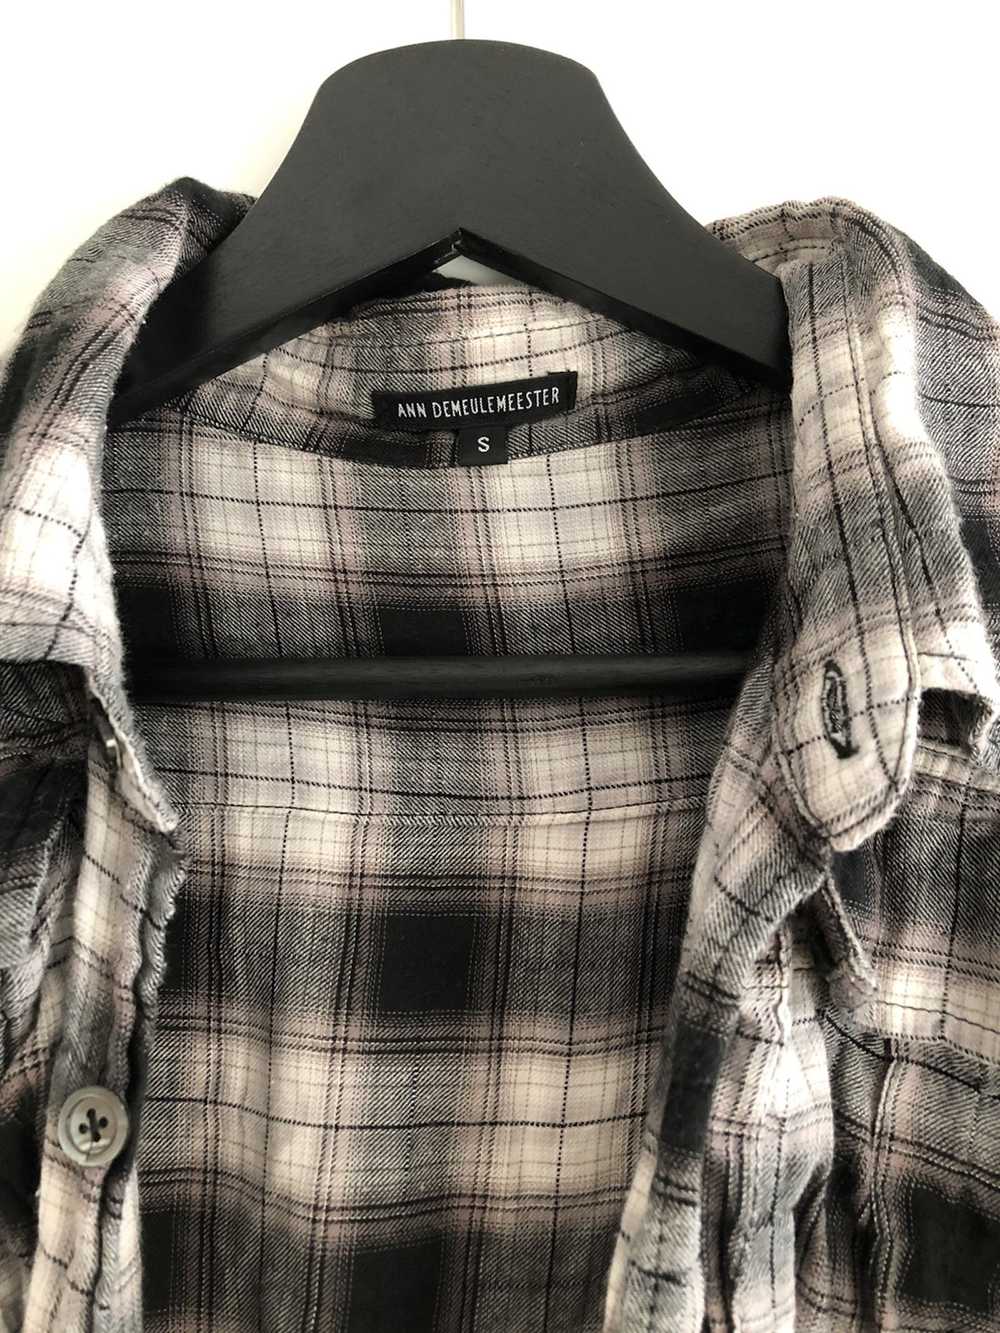 Ann Demeulemeester Archive checked Shirt - image 4